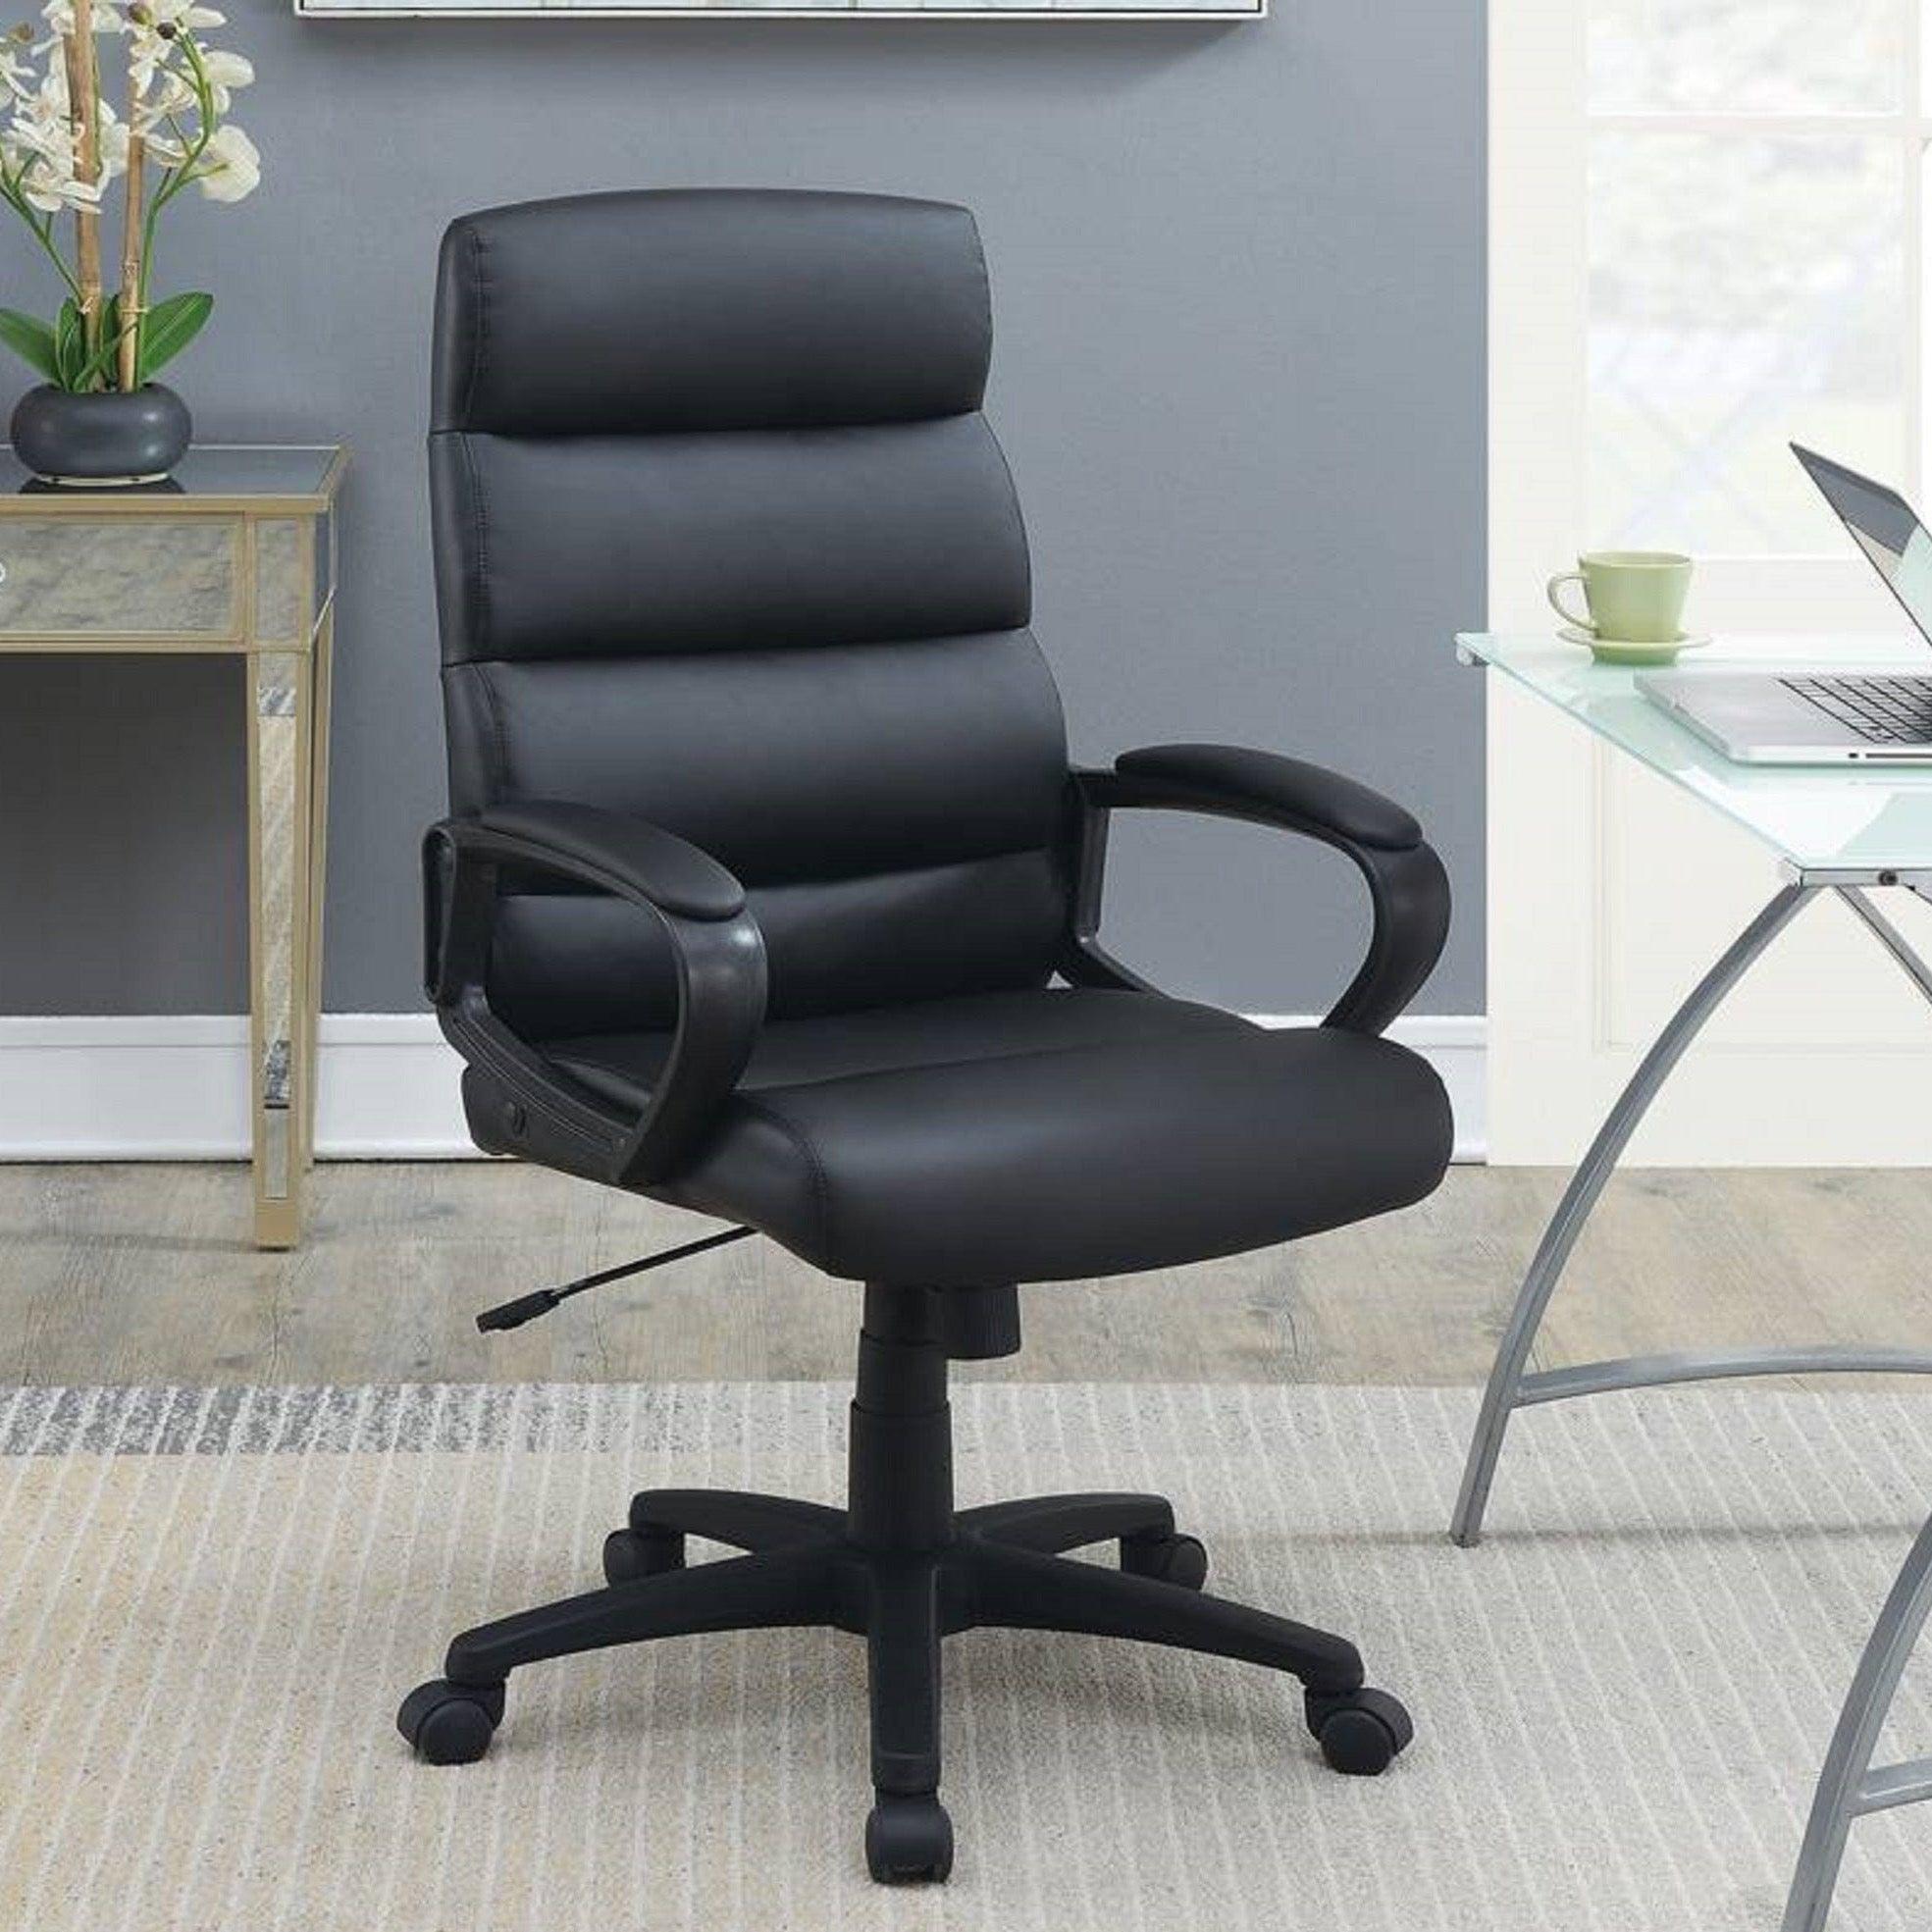 Shop Black Faux leather Cushioned Upholstered 1pc Office Chair Adjustable Height Desk Chair Relax Mademoiselle Home Decor